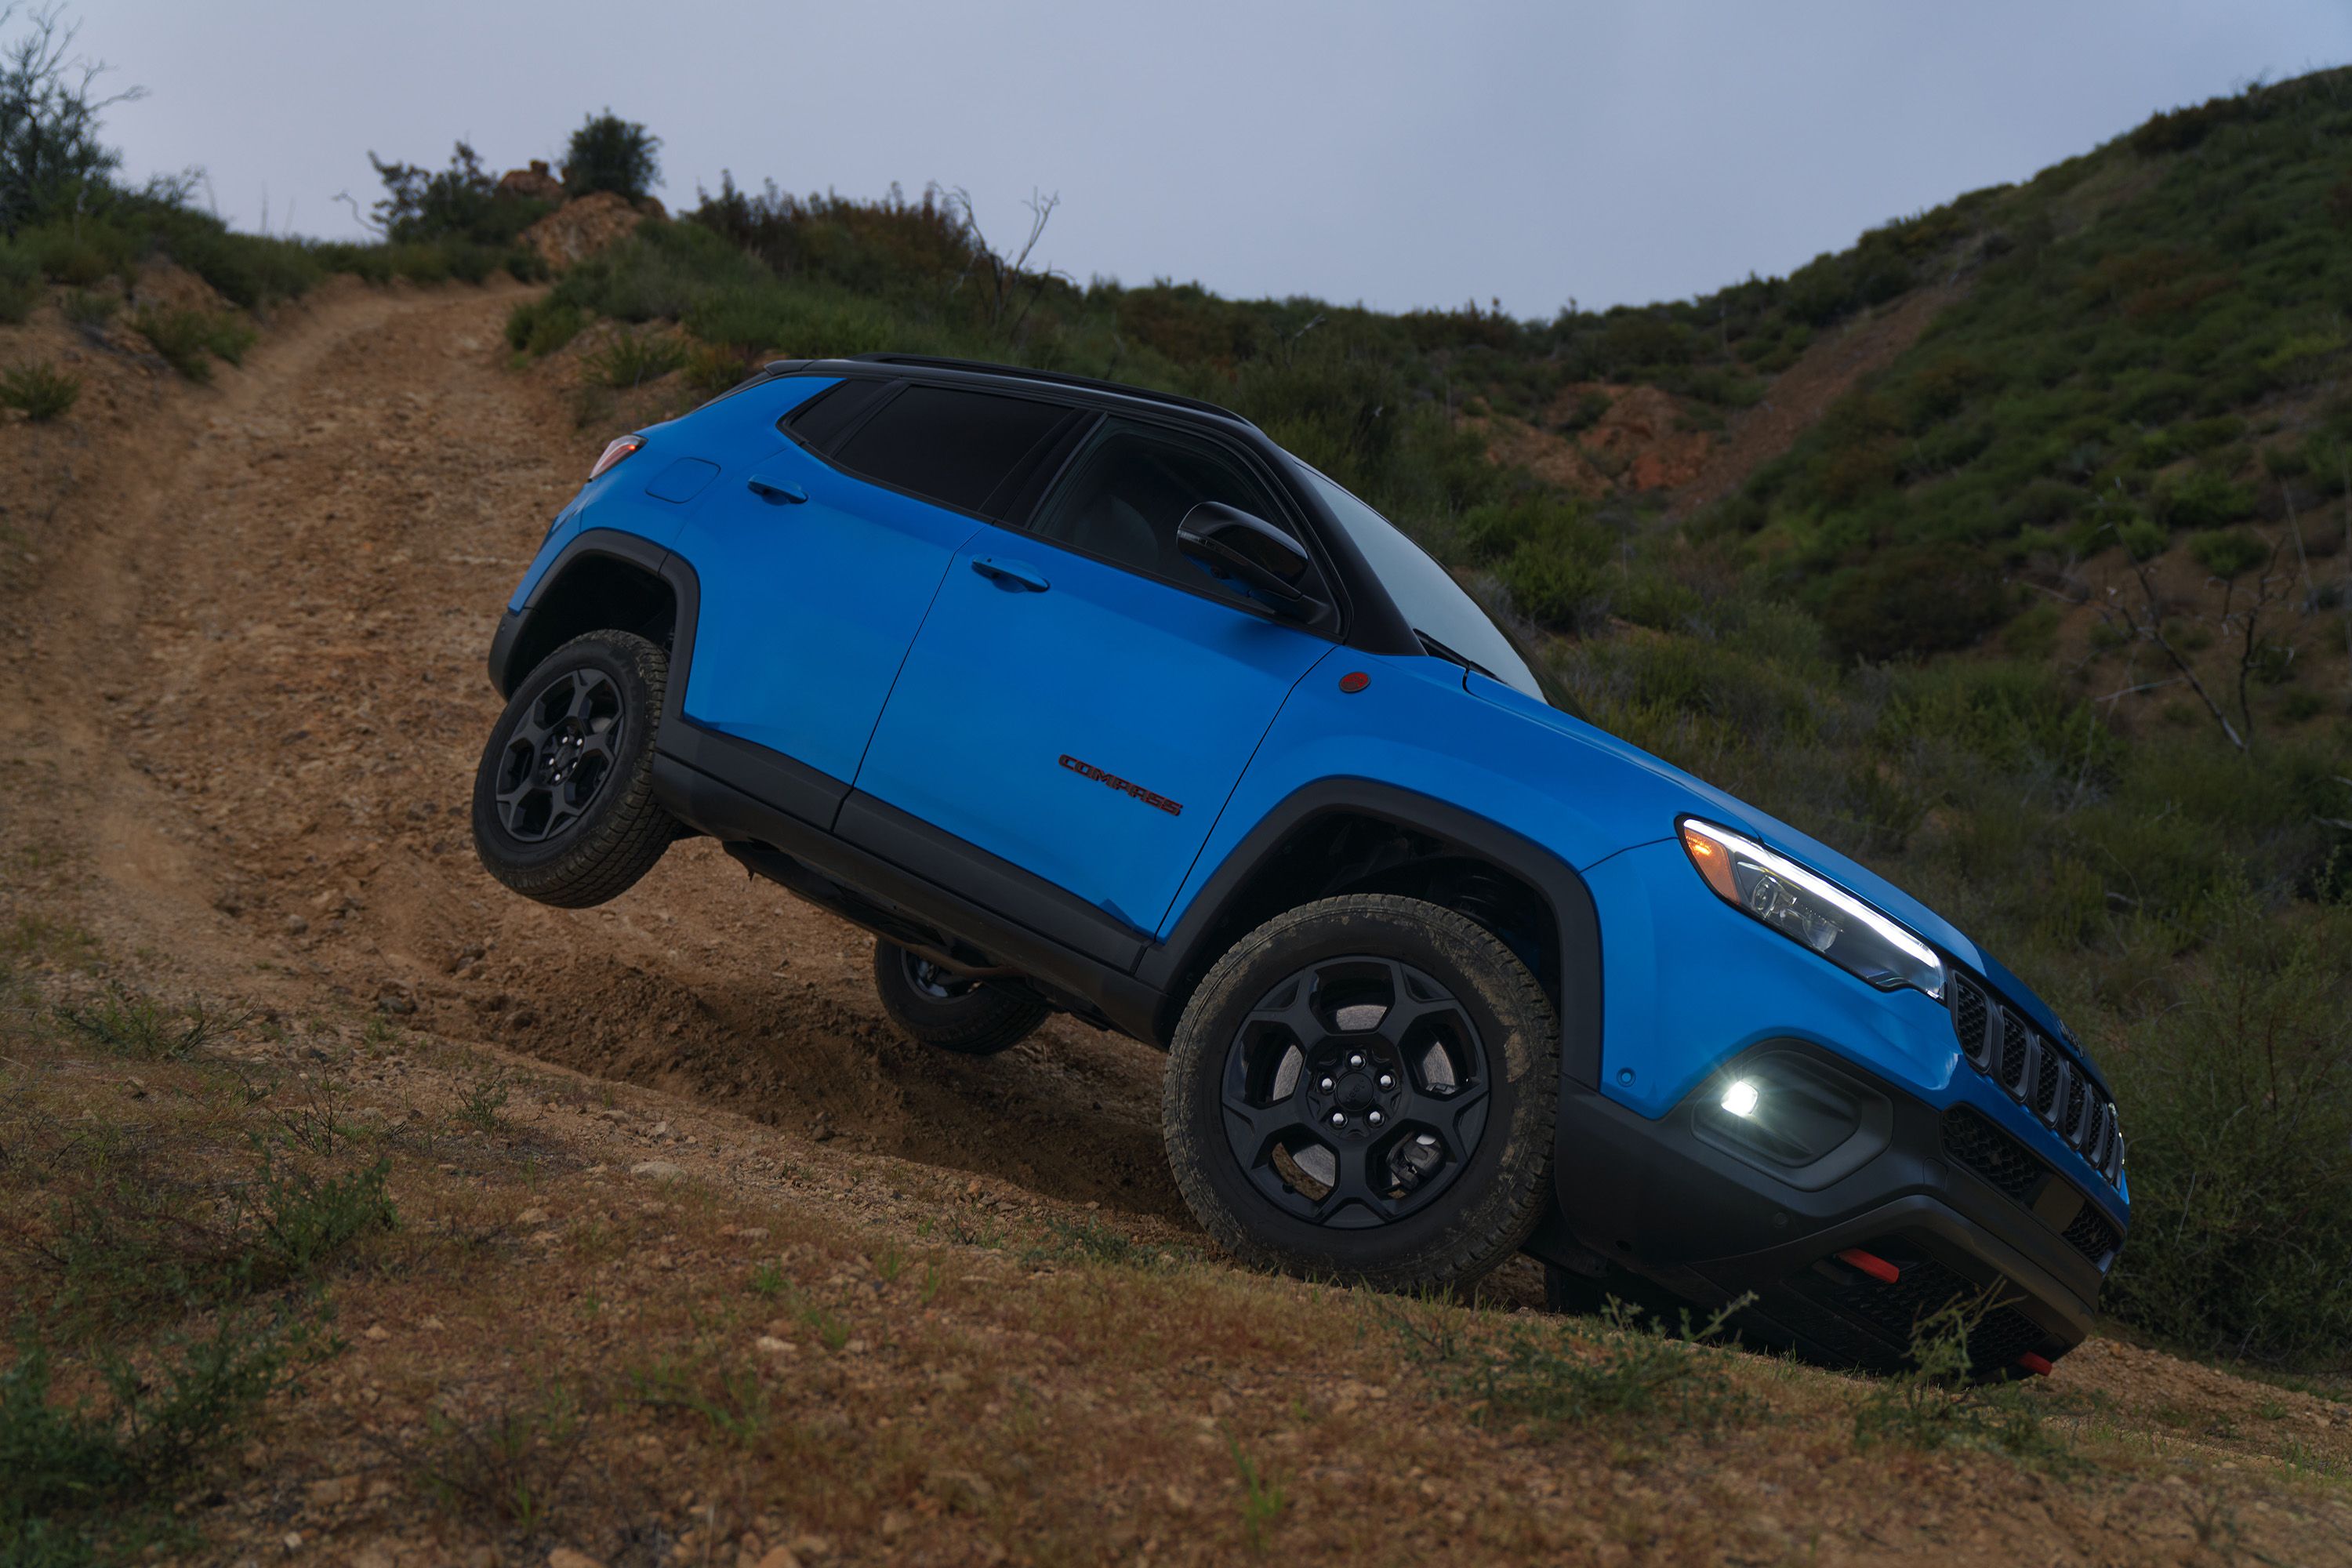 2022 Jeep Compass Will Have a Nicer, More Modern Interior